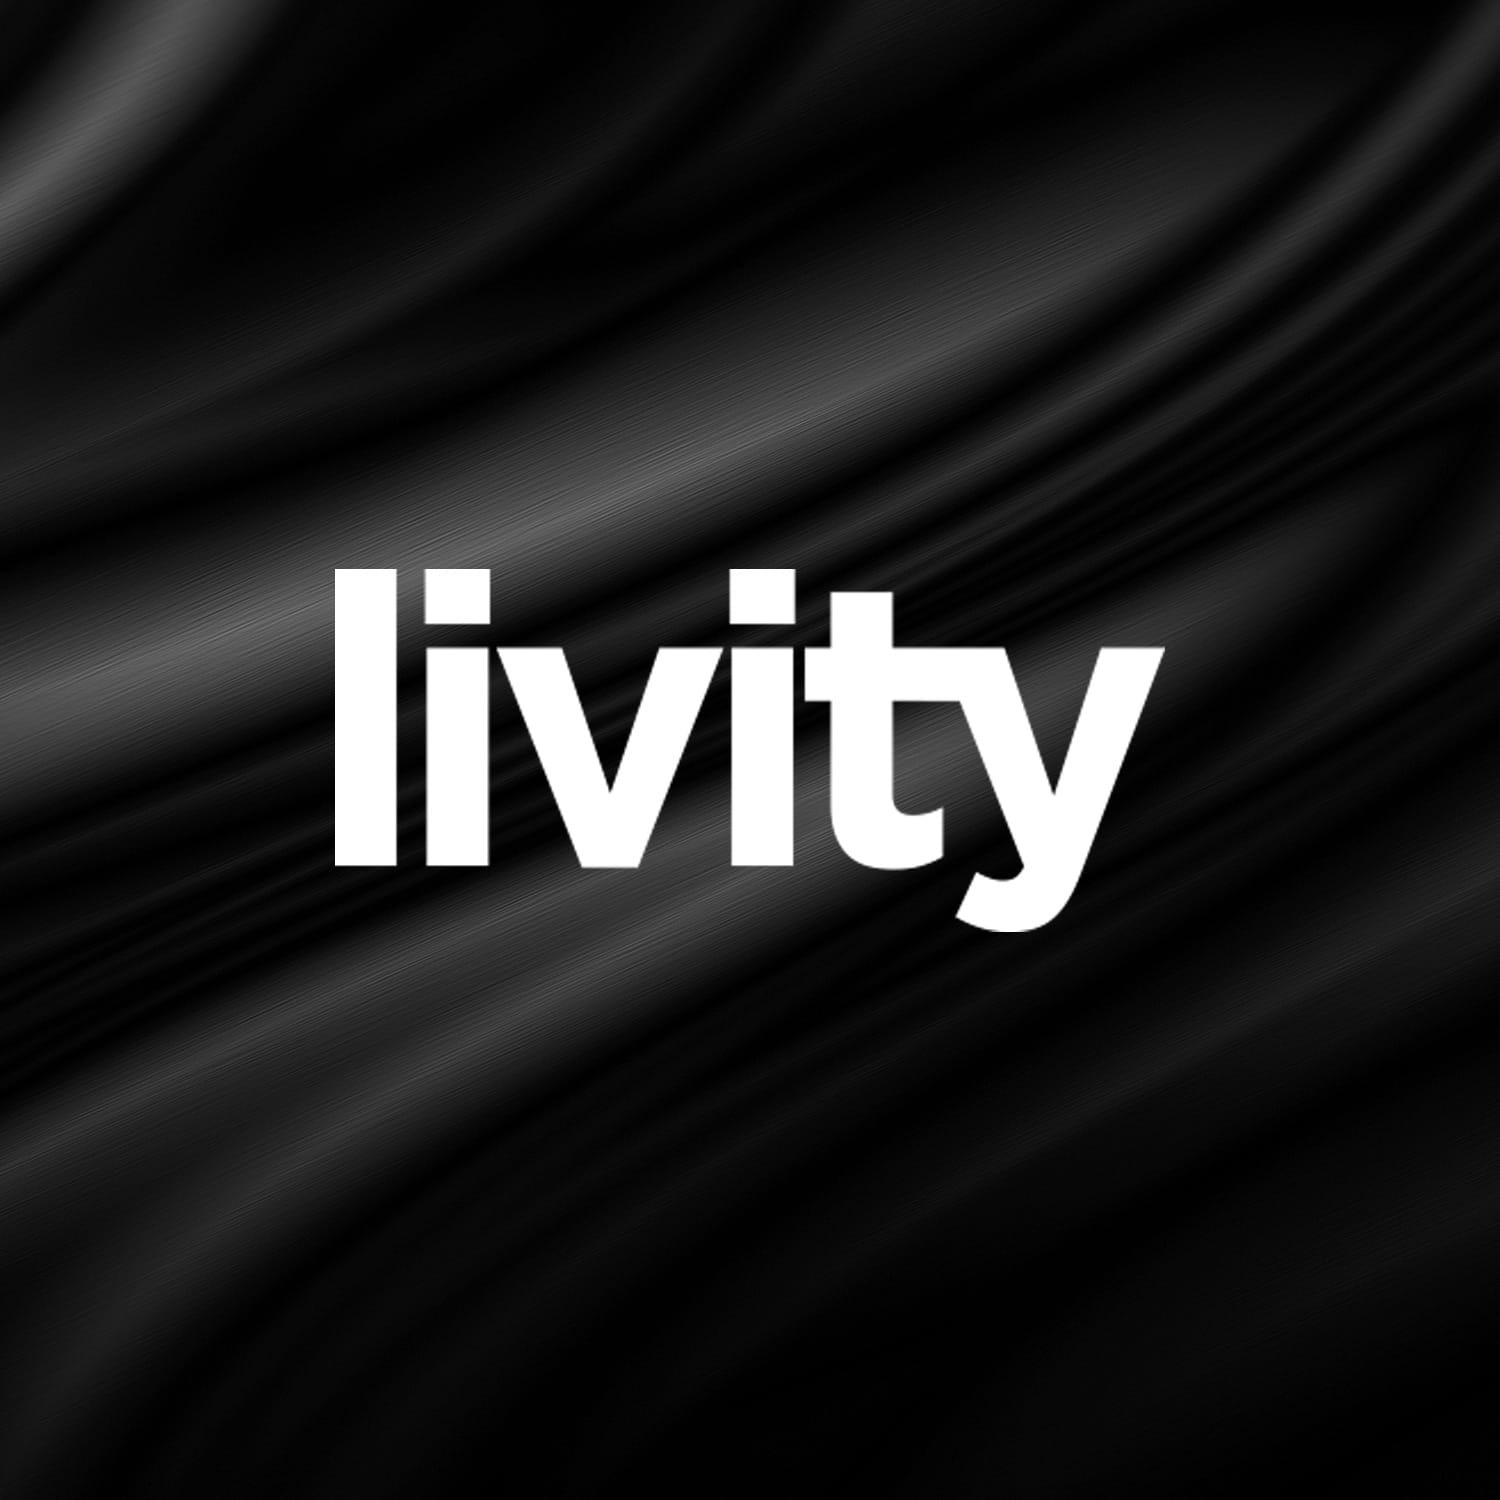 Livity: Excellence In Black